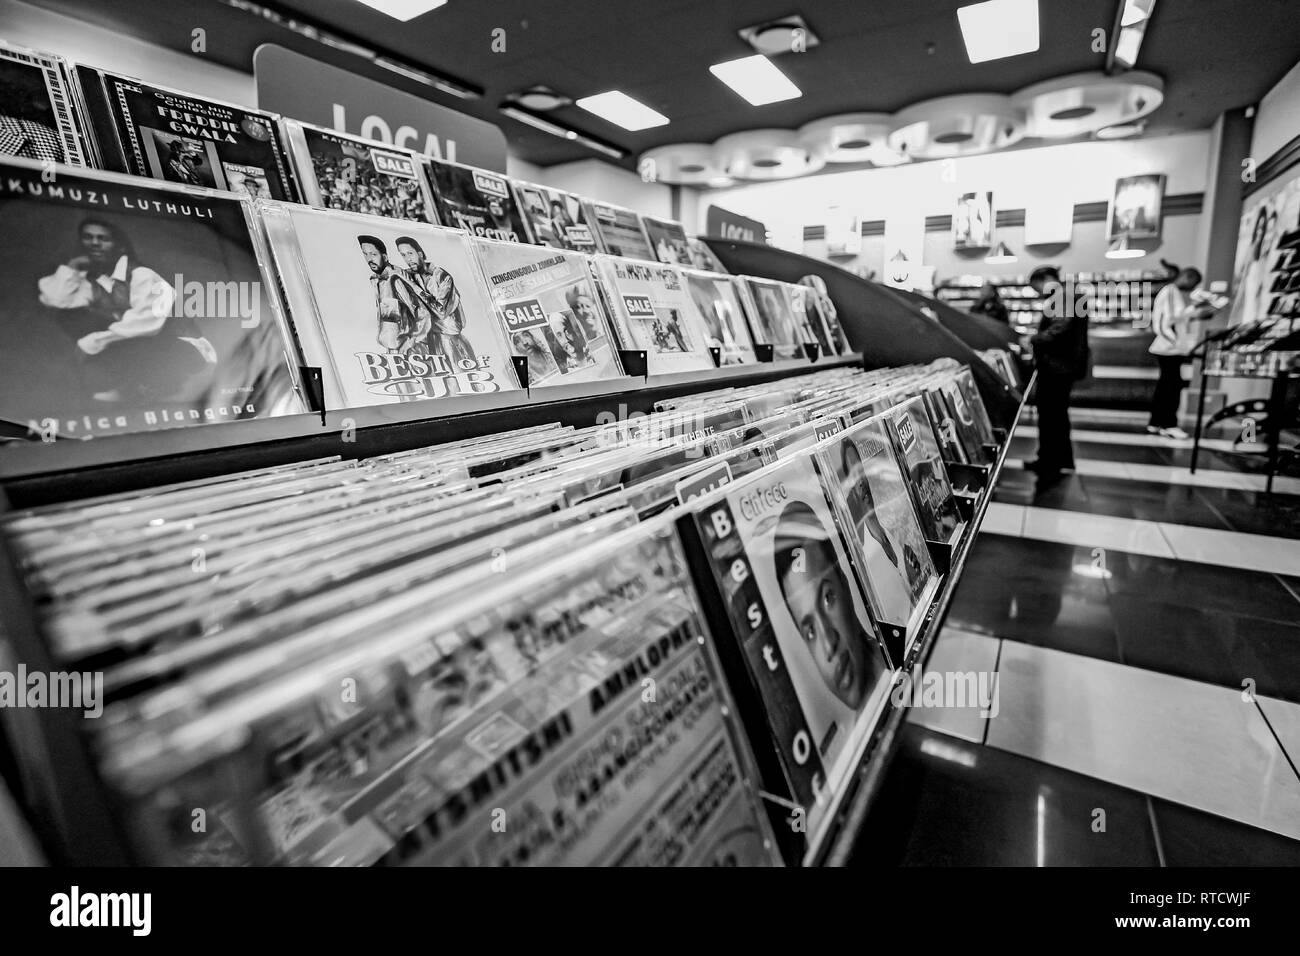 Johannesburg, South Africa - July 05 2011: Inside interior of a Music CD Store Stock Photo